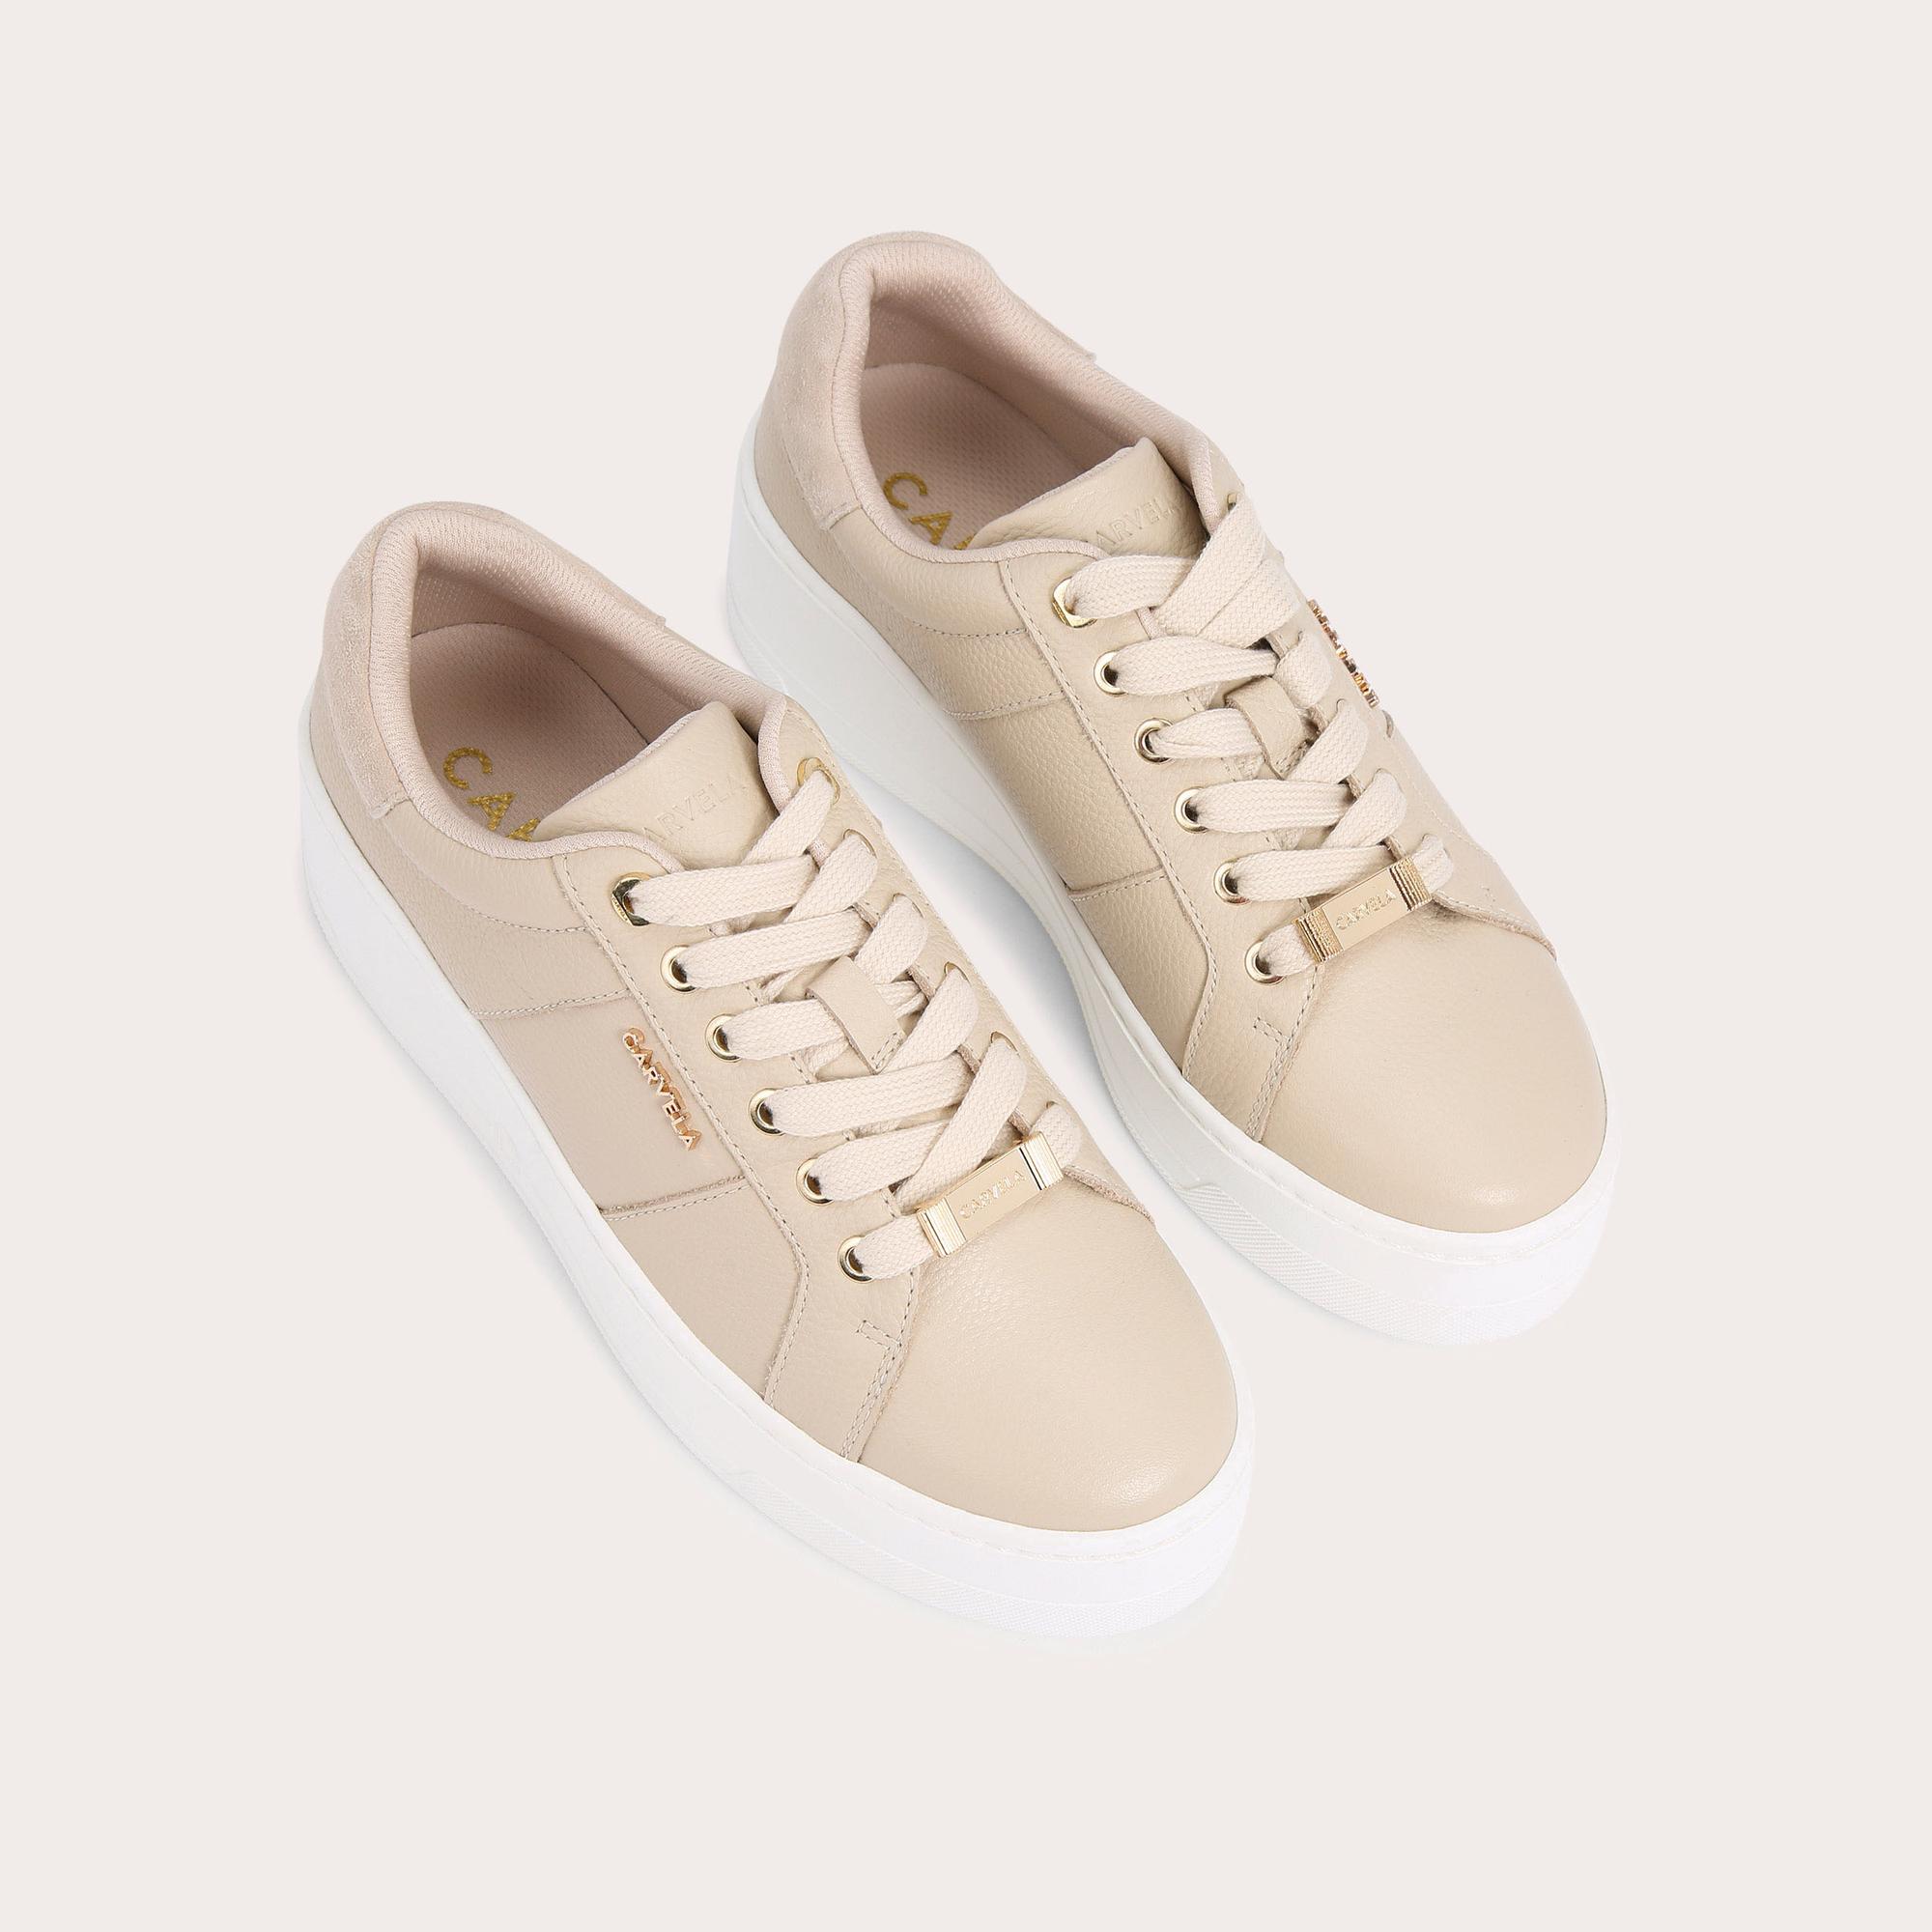 Women's Trainers | High Tops, Sock Sneakers & Casual Carvela